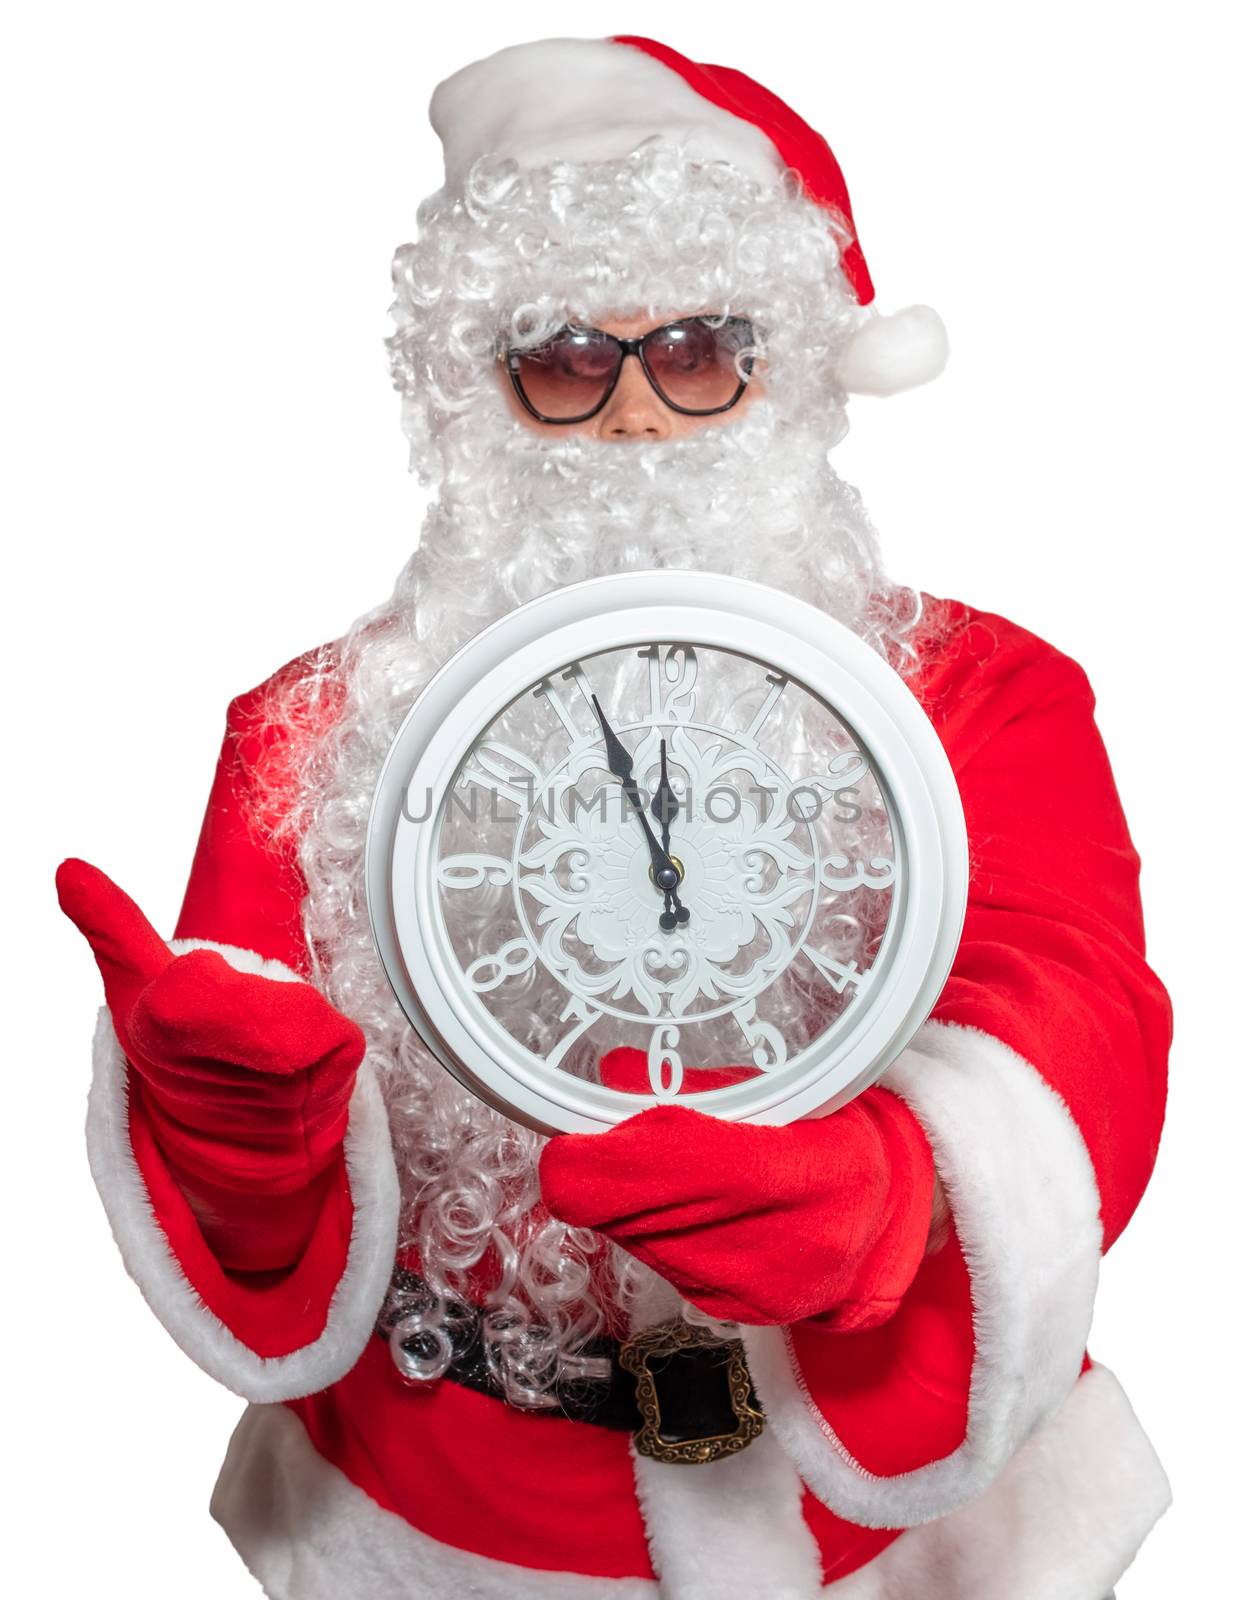 Santa Claus holding a white clock which shows five minutes to midnight. New year's eve concept. He is wearing sunglasses, long white beard. Isolated on white background.